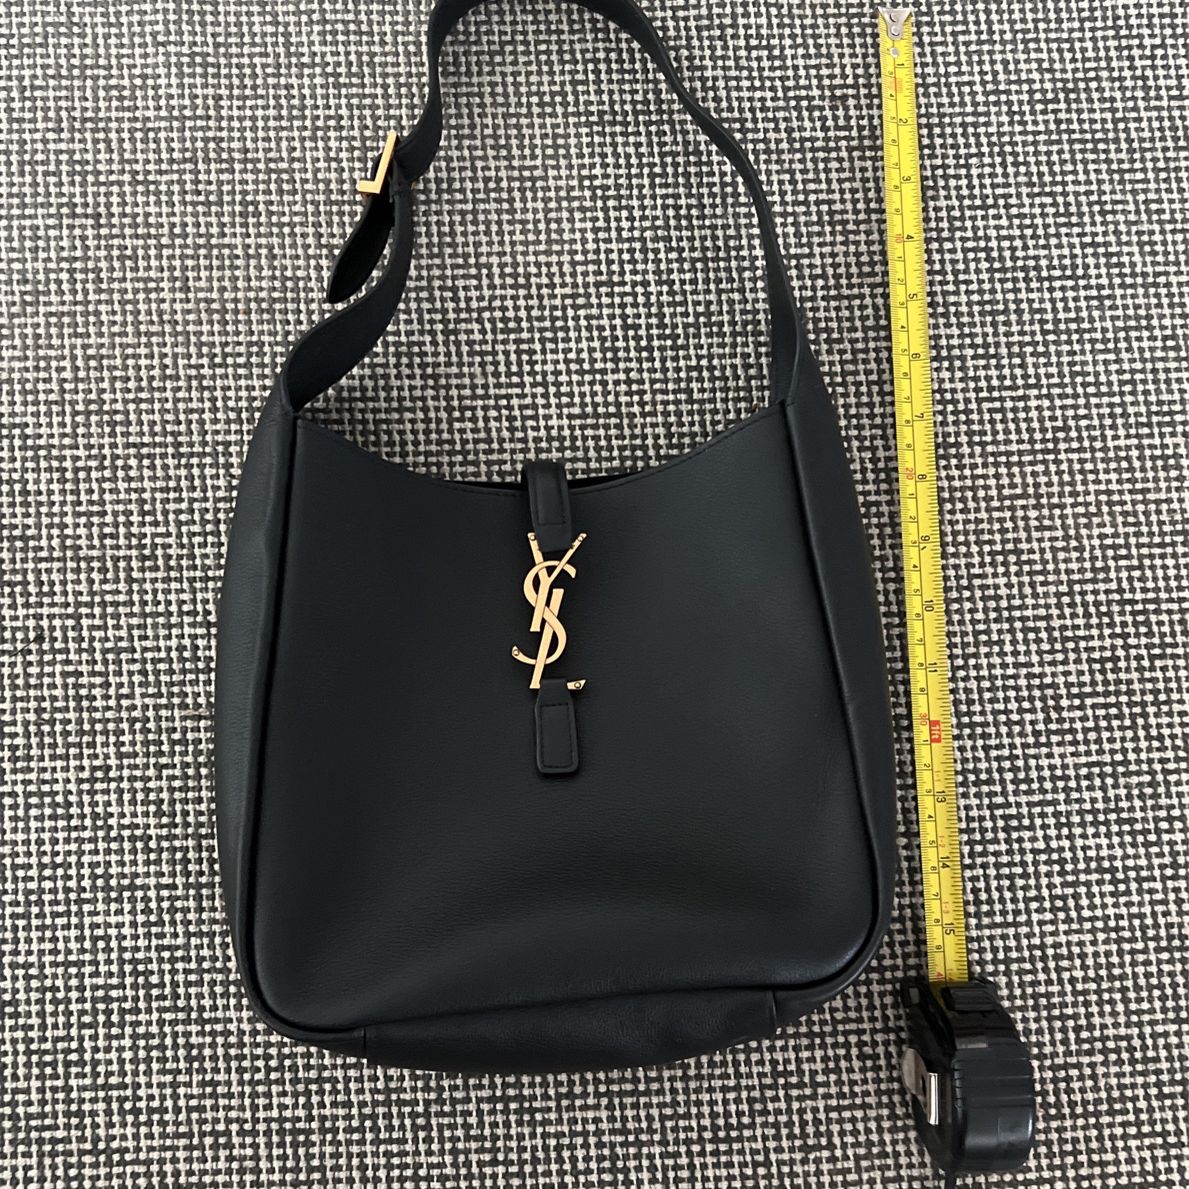 YSL bag LE 5 À 7 SUPPLE SMALL Gently Used 